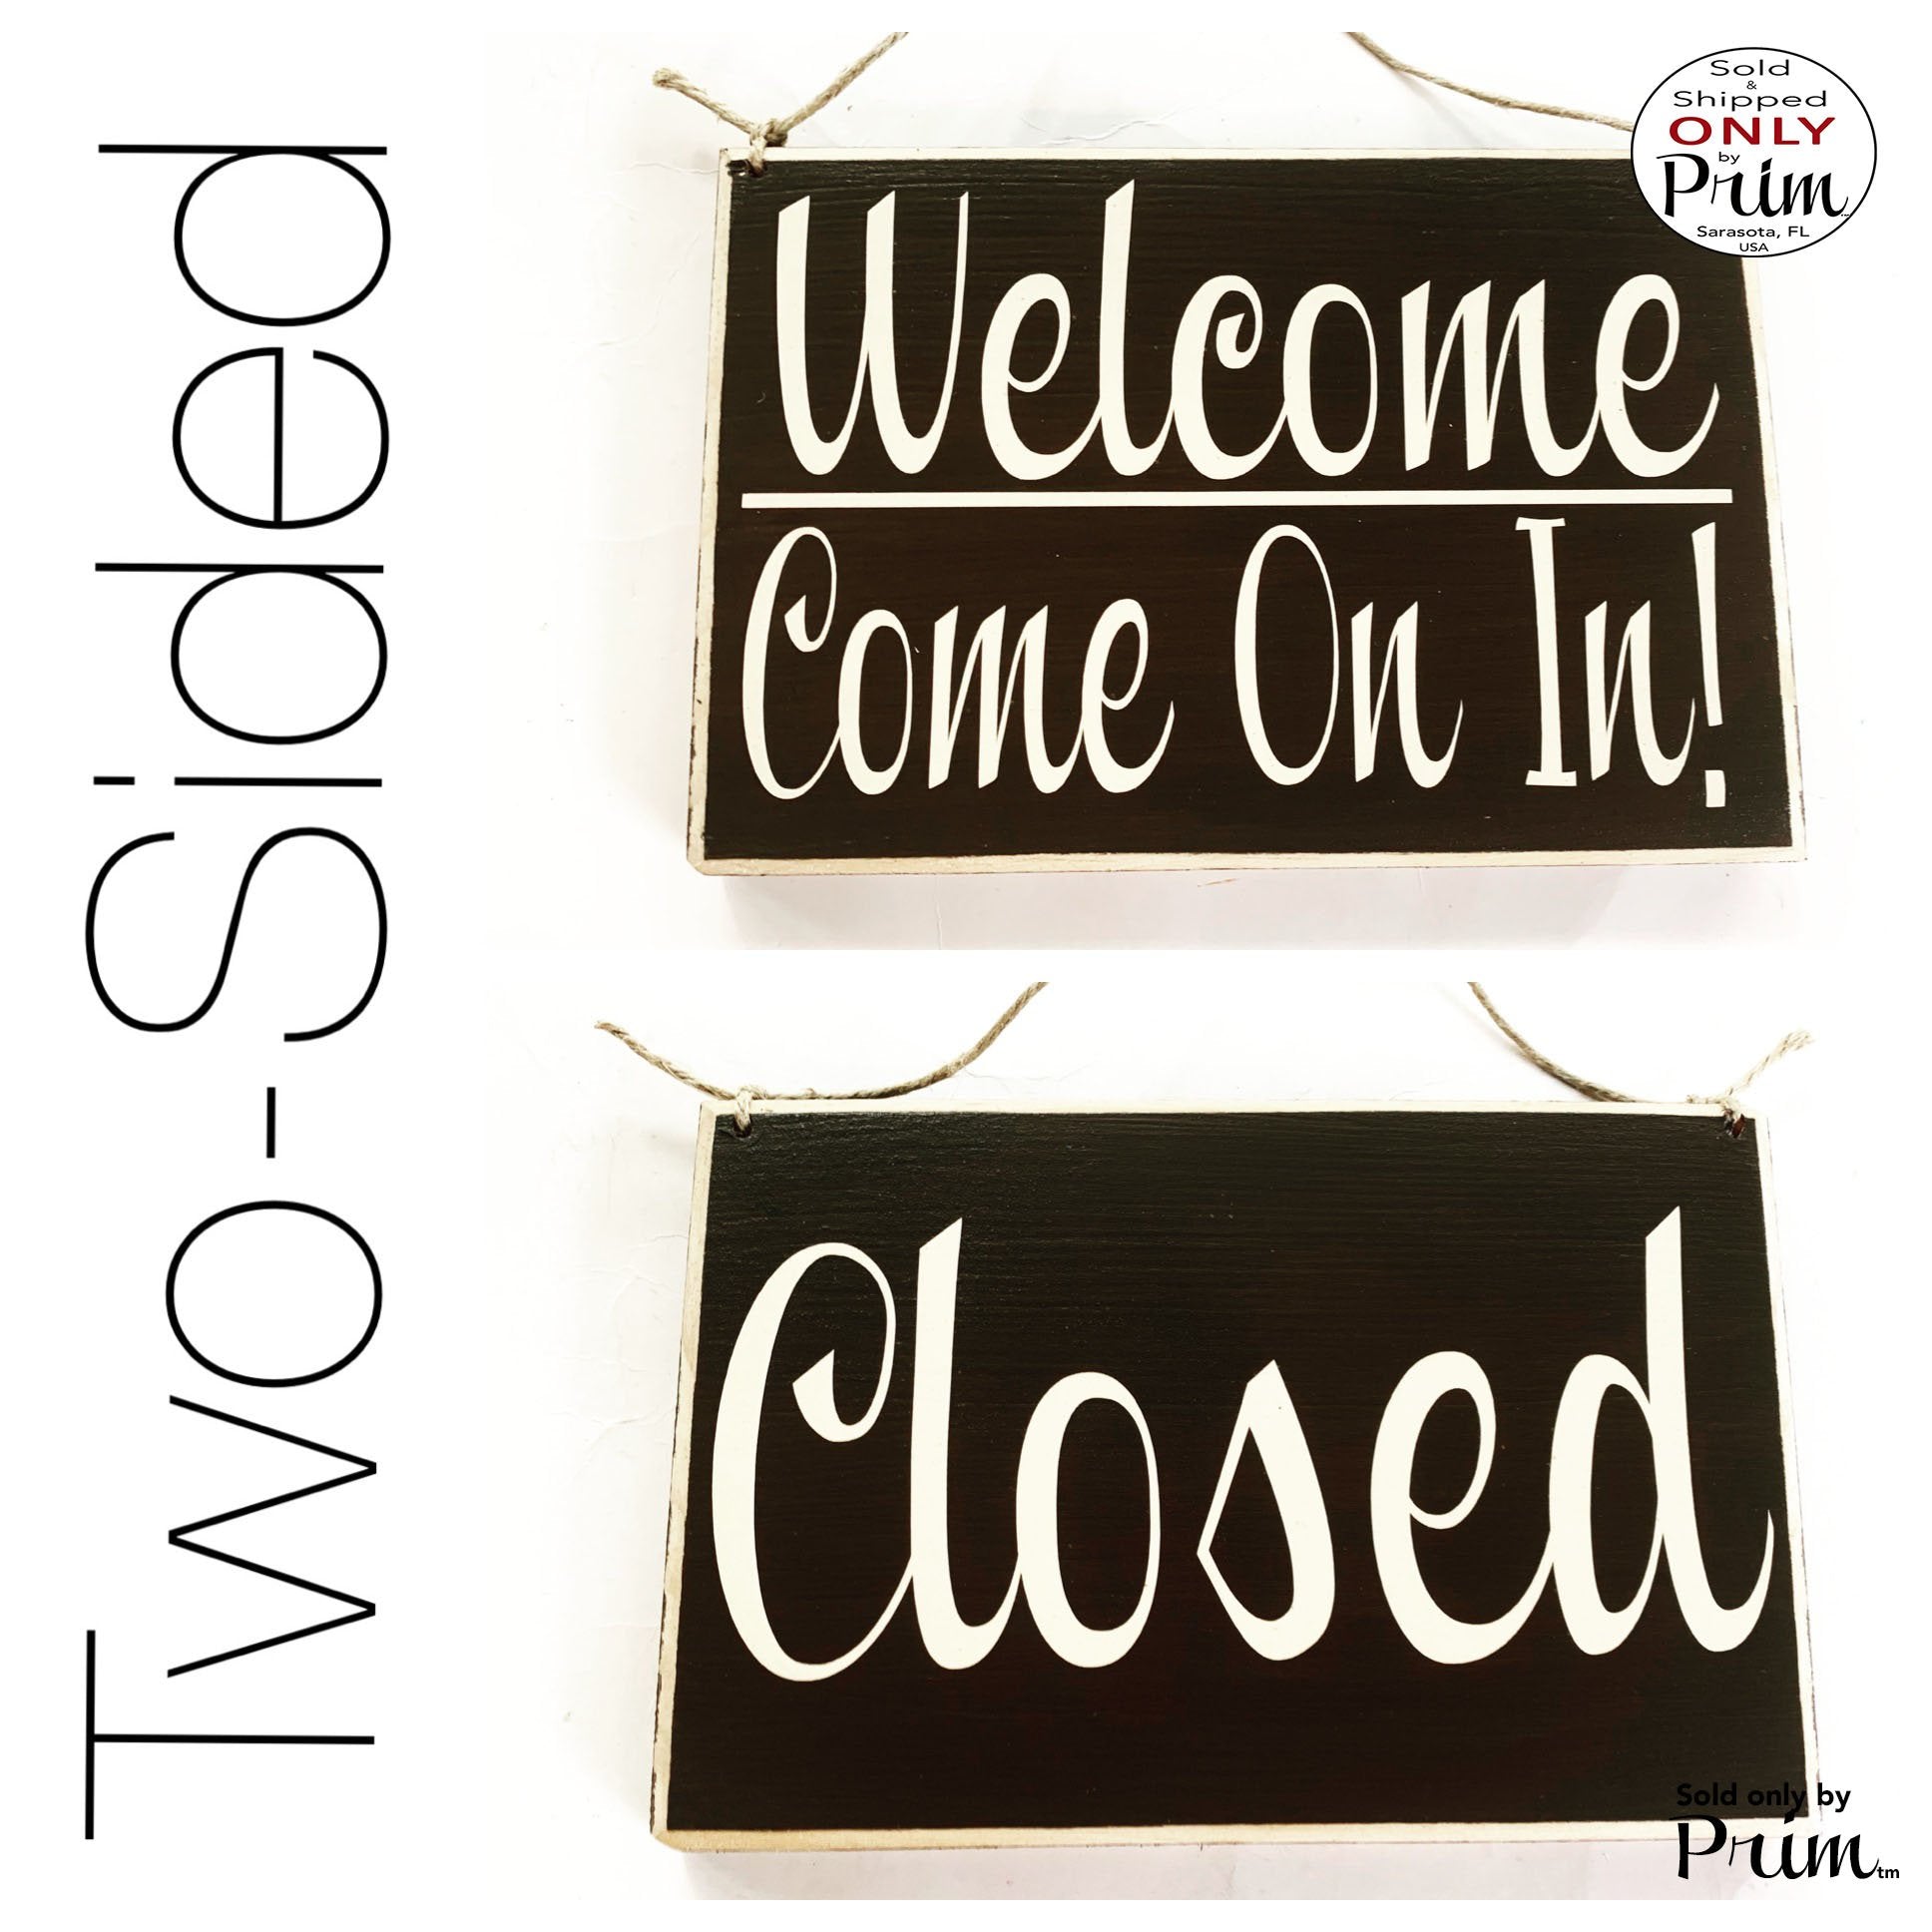 Two Sided 8x6 Closed Welcome Come On In Custom Wood Sign | In Session Progress Please Do Not Disturb Spa Salon Office Door Hanger Plaque